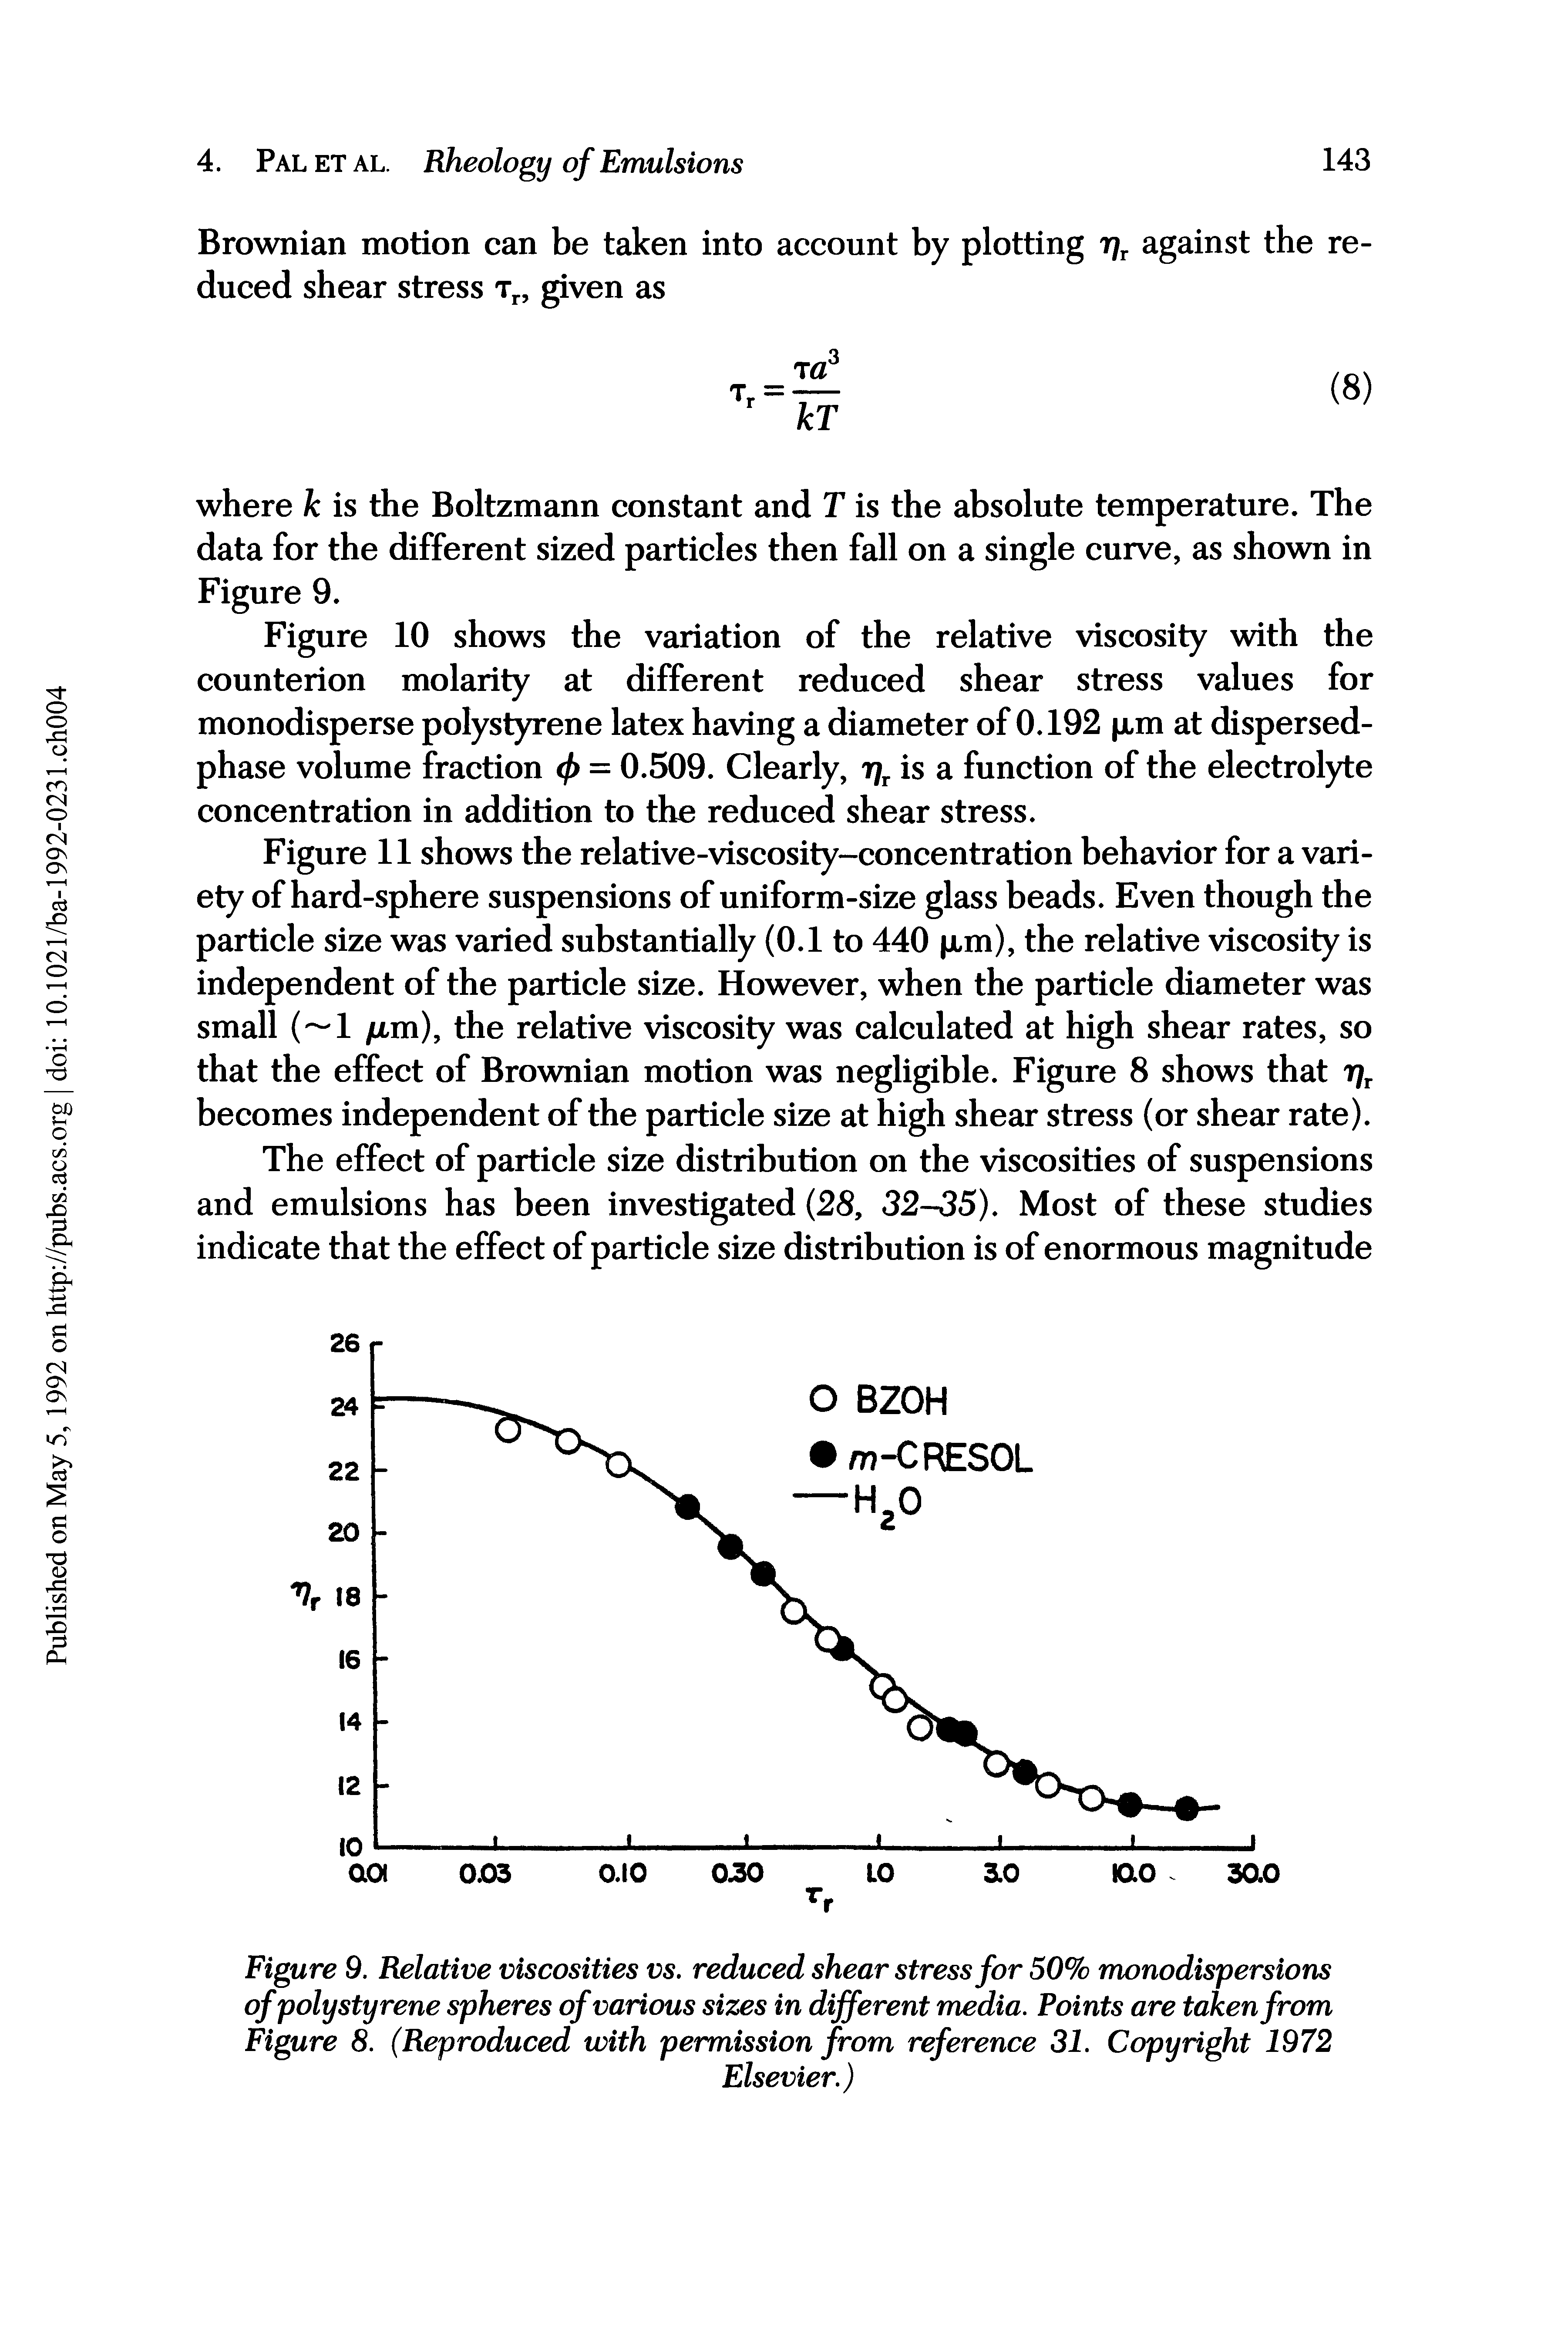 Figure 9. Relative viscosities vs. reduced shear stress for 50% monodispersions of polystyrene spheres of various sizes in different media. Points are taken from Figure 8. (Reproduced with permission from reference 31. Copyright 1972...